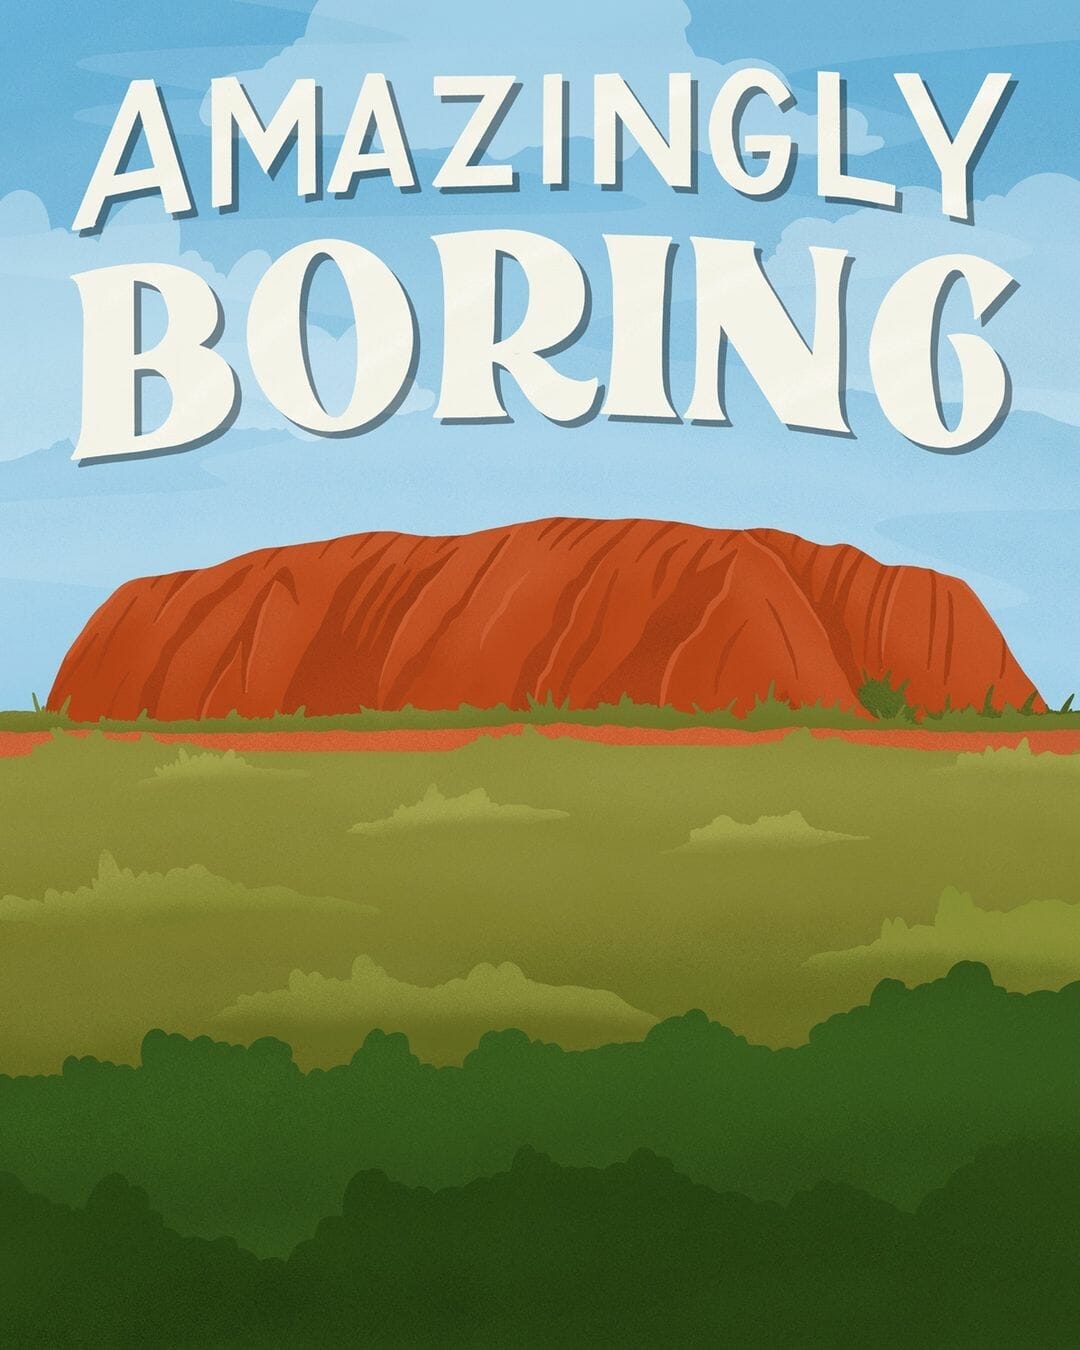 Artist Creates Funny Travel Posters Based on Bad Reviews 